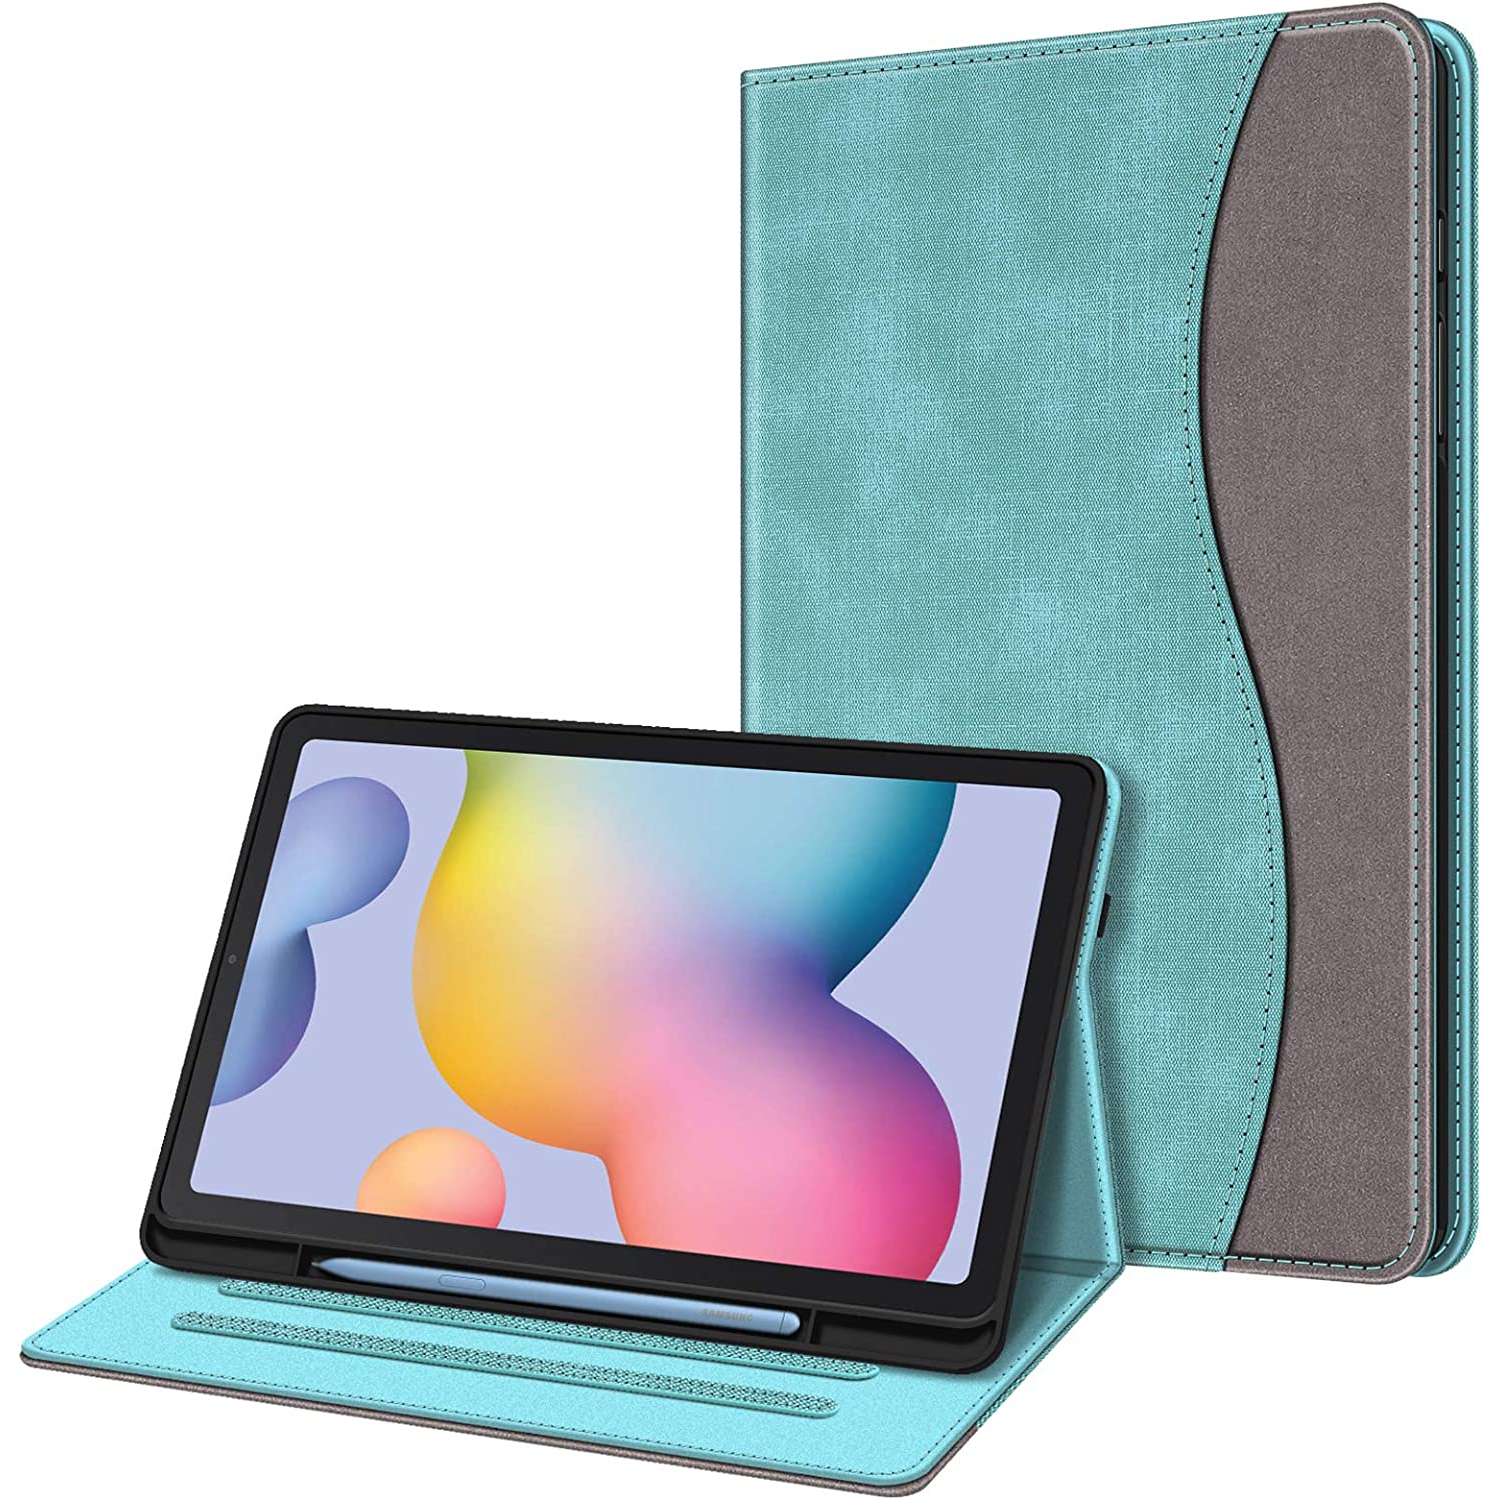 F Case for Samsung Galaxy Tab S6 Lite 10.4 inch 2022/2020 Model (SM-P610/P613/P615/P619) with S Pen Holder, Multi-Angle Viewing Soft TPU Back Cover with Pocket Auto Wake/Sleep, Tur